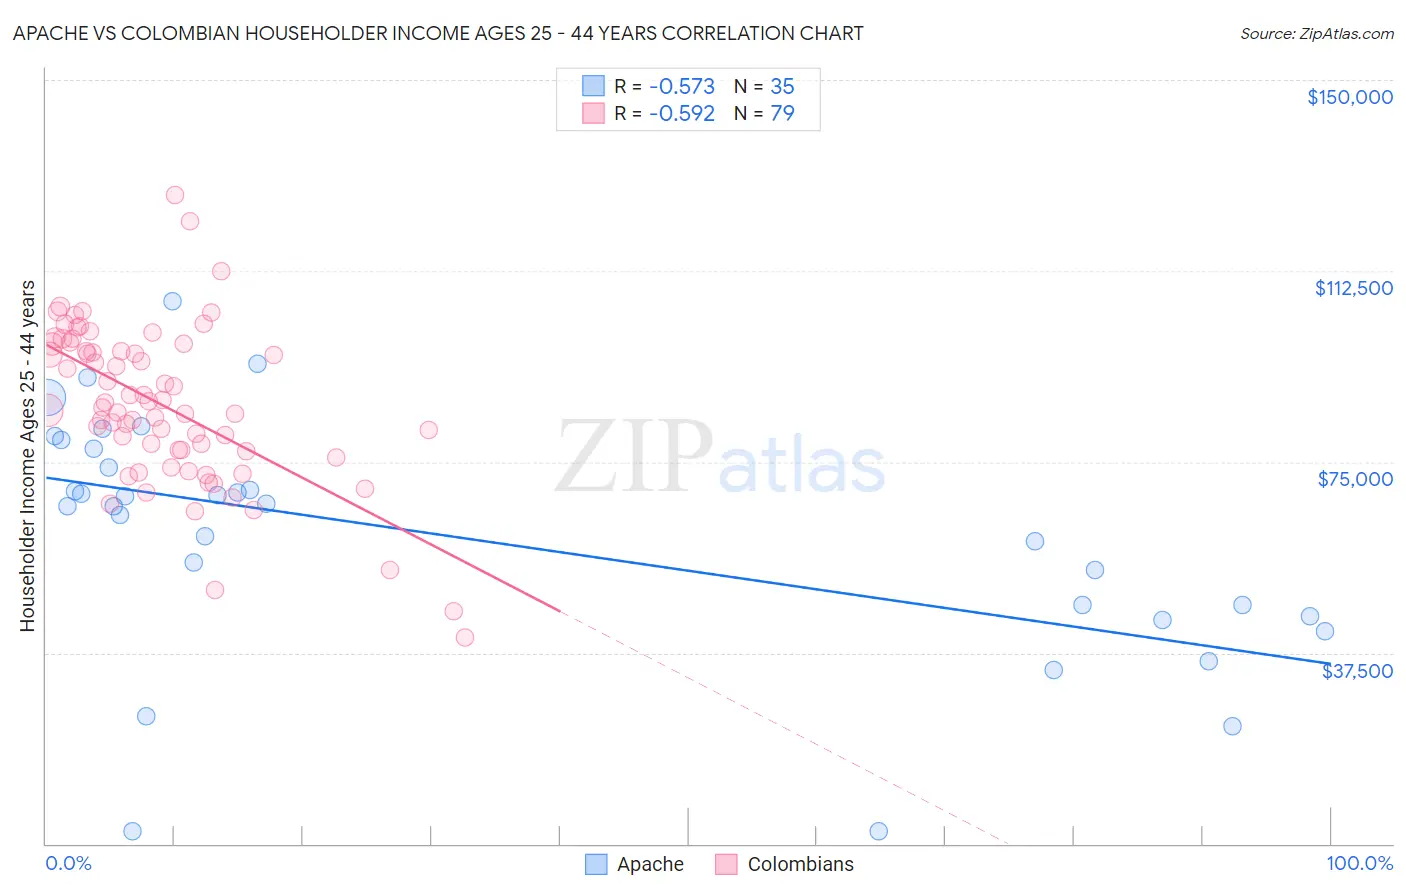 Apache vs Colombian Householder Income Ages 25 - 44 years